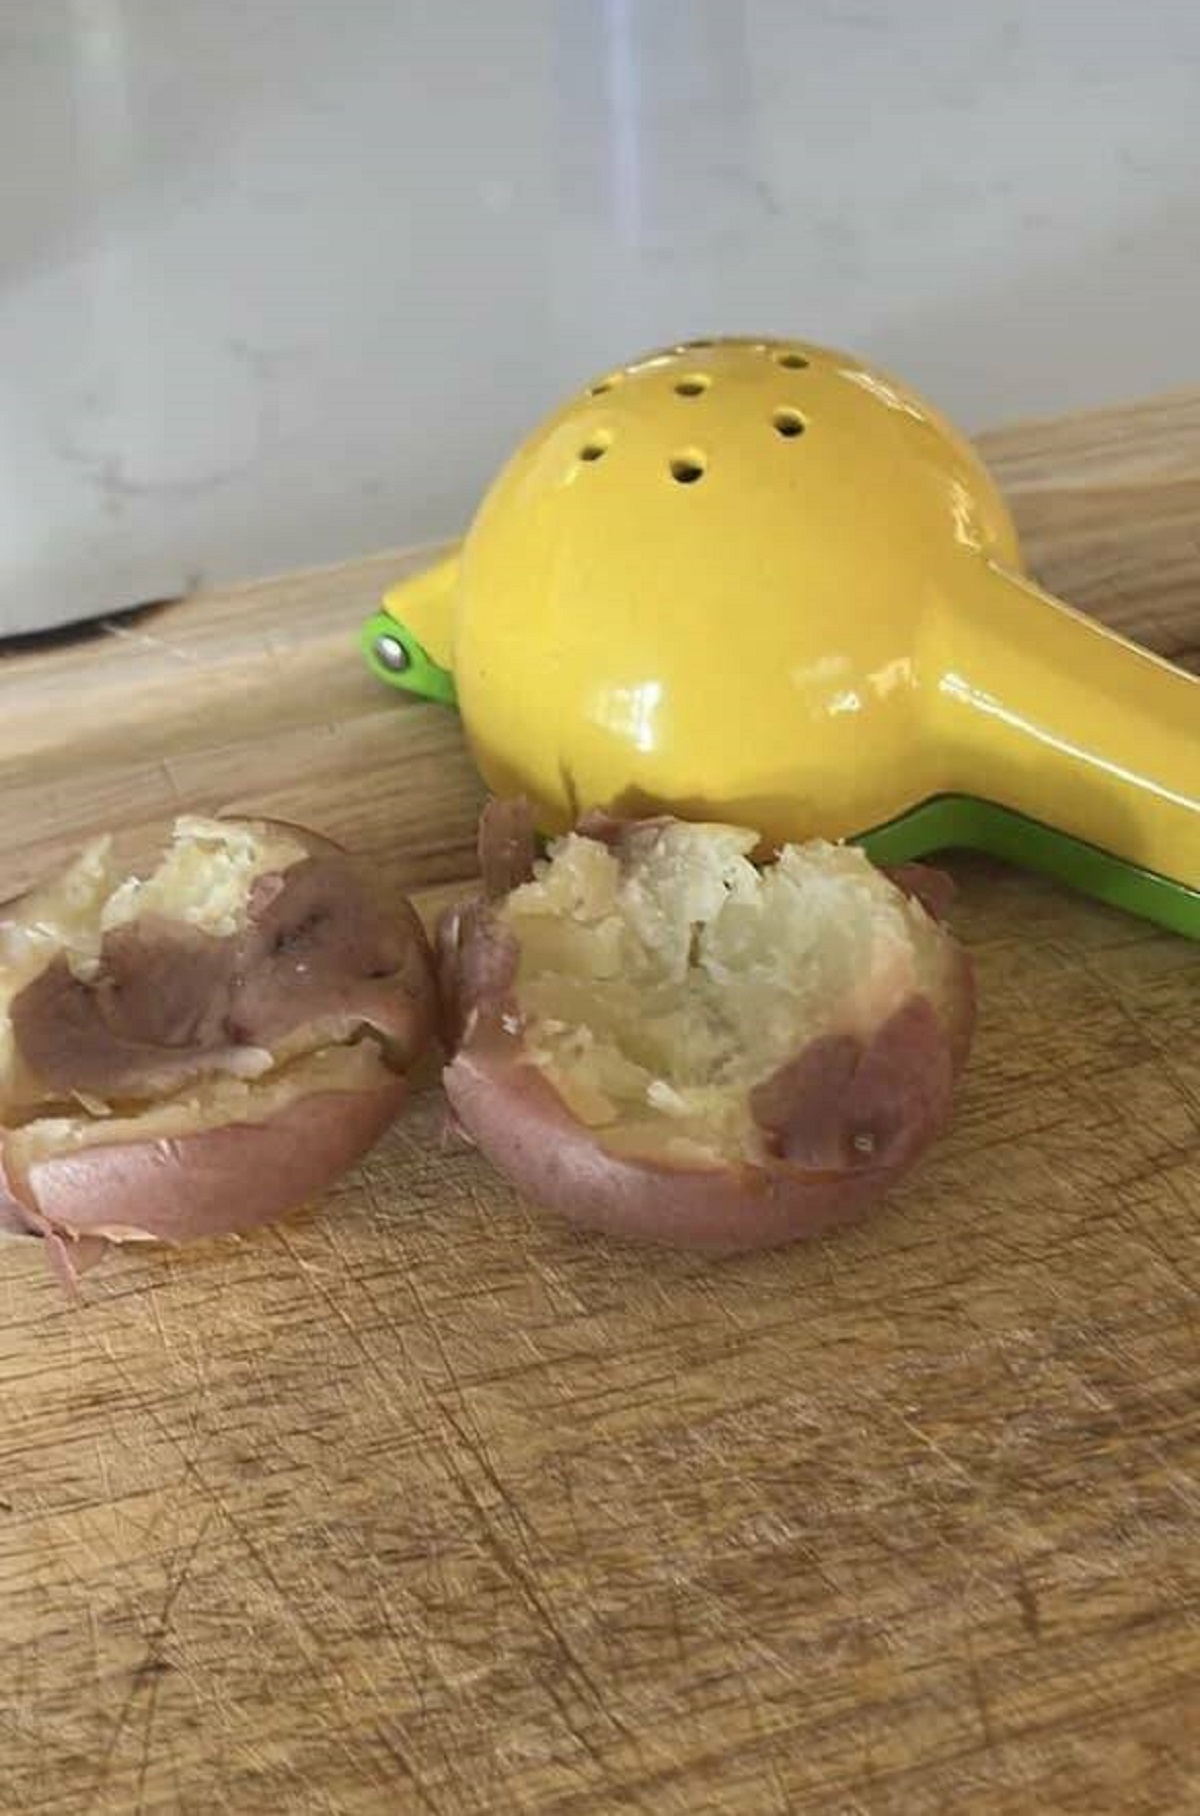 "Use a lemon juicer to make the perfect smashed potatoes that get extra crispy."